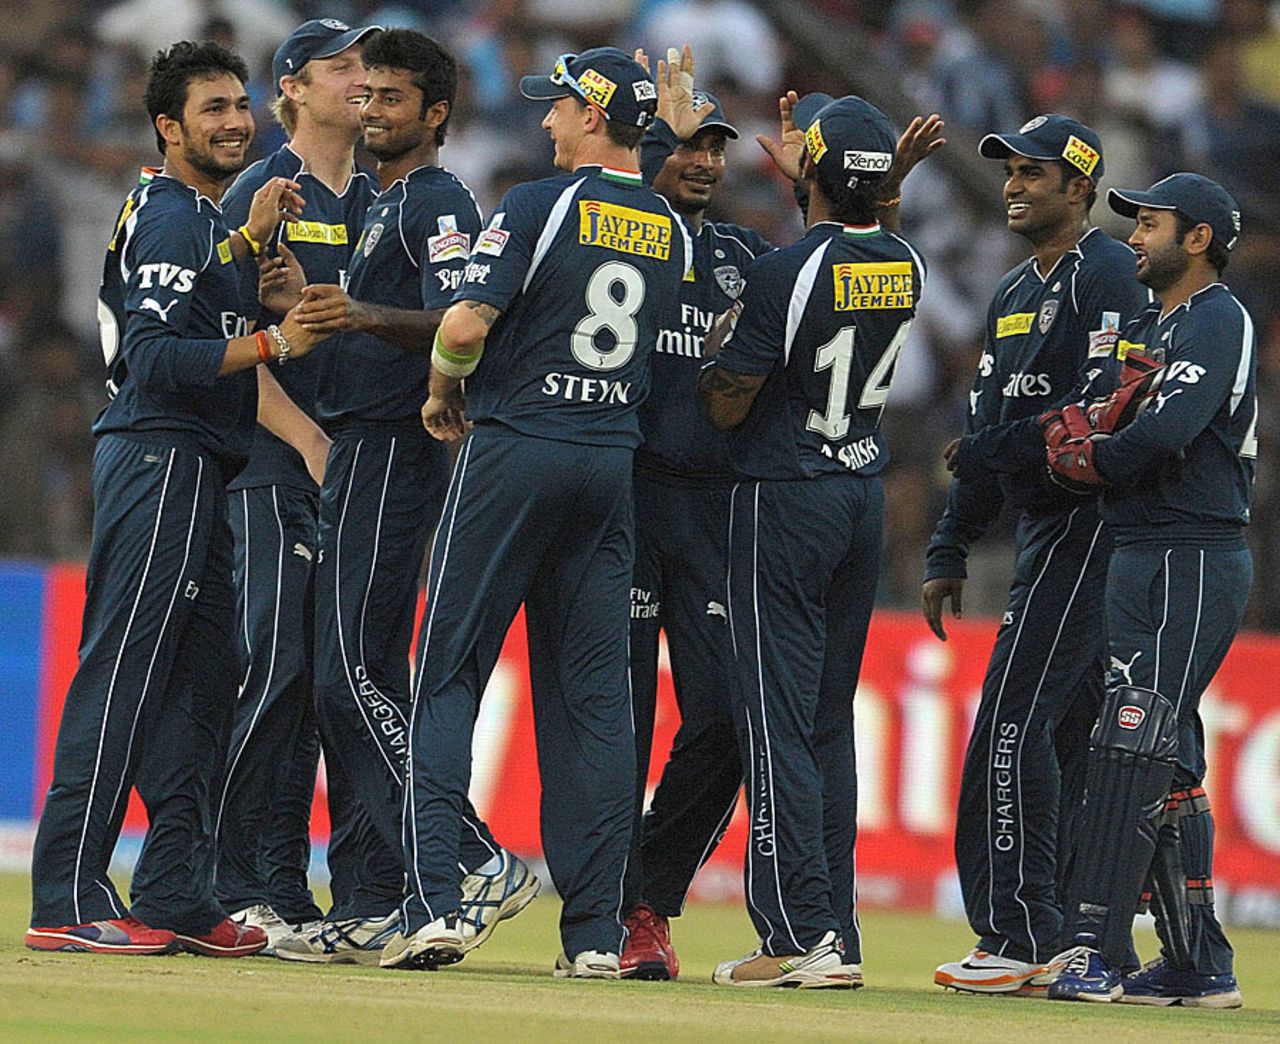 Deccan Chargers celebrated their second win against Pune Warriors, Deccan Chargers v Pune Warriors, IPL, Cuttack, May 1, 2012